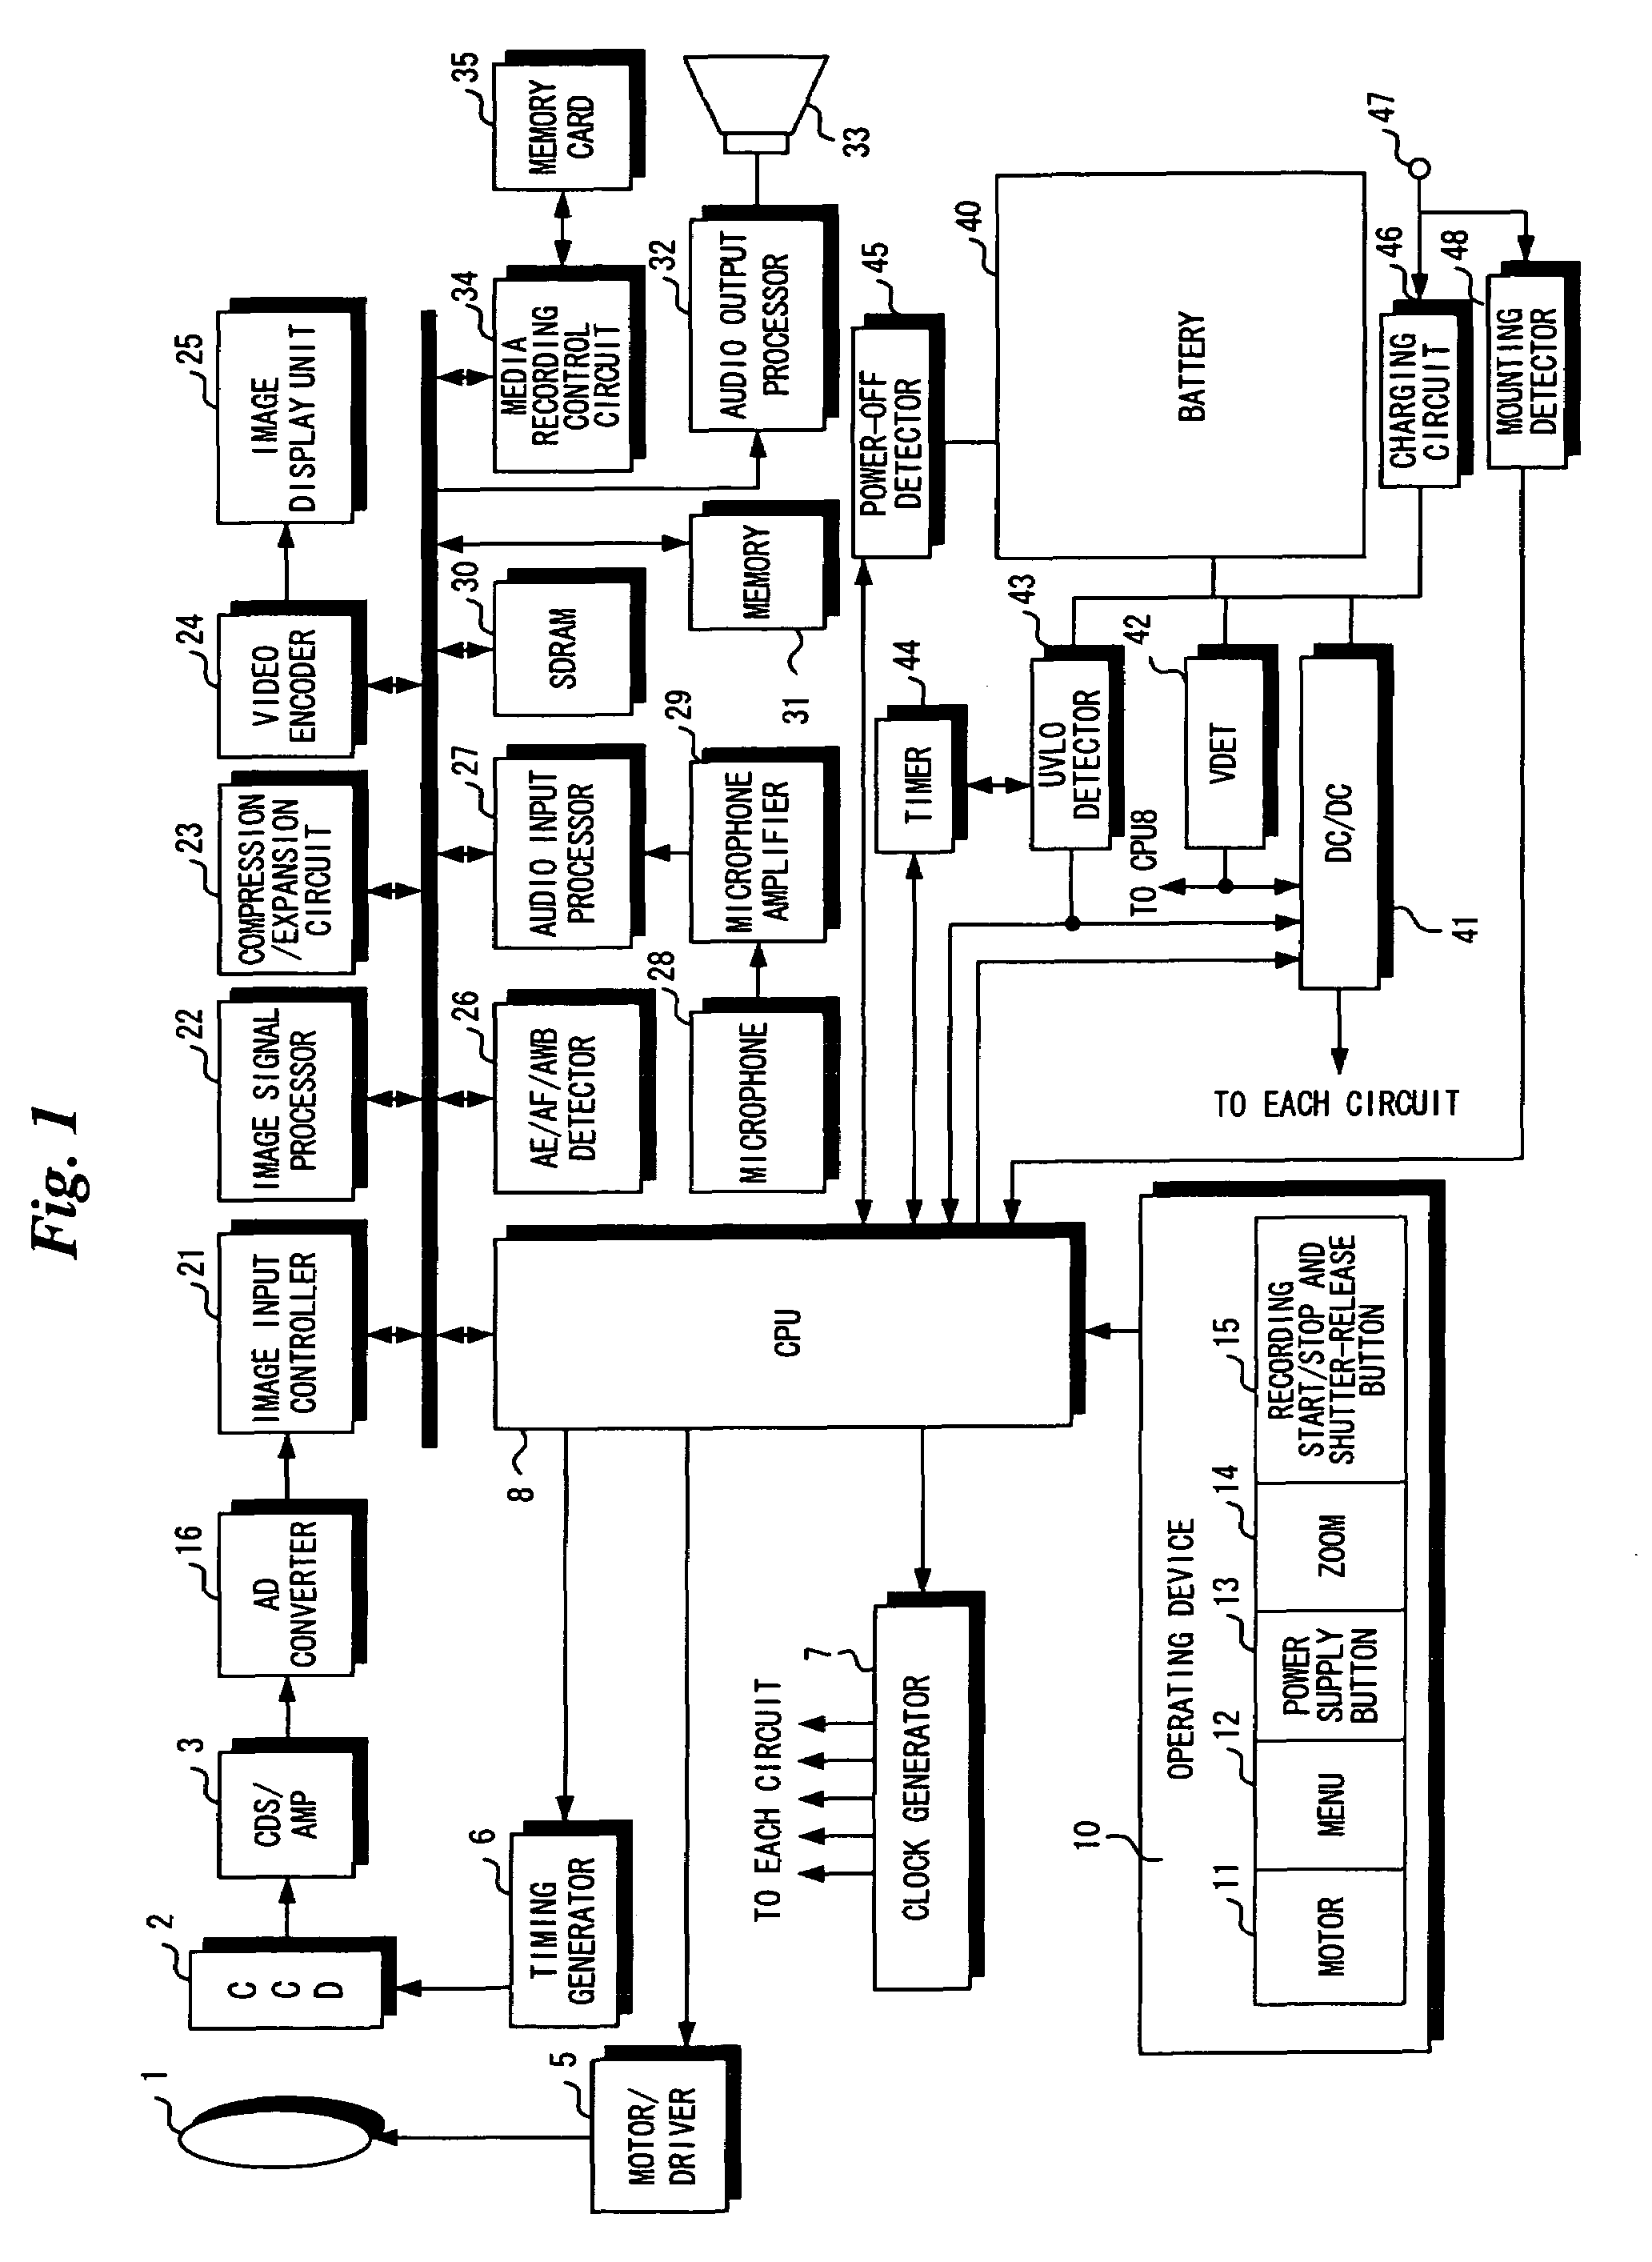 Apparatus and method for controlling electronic device